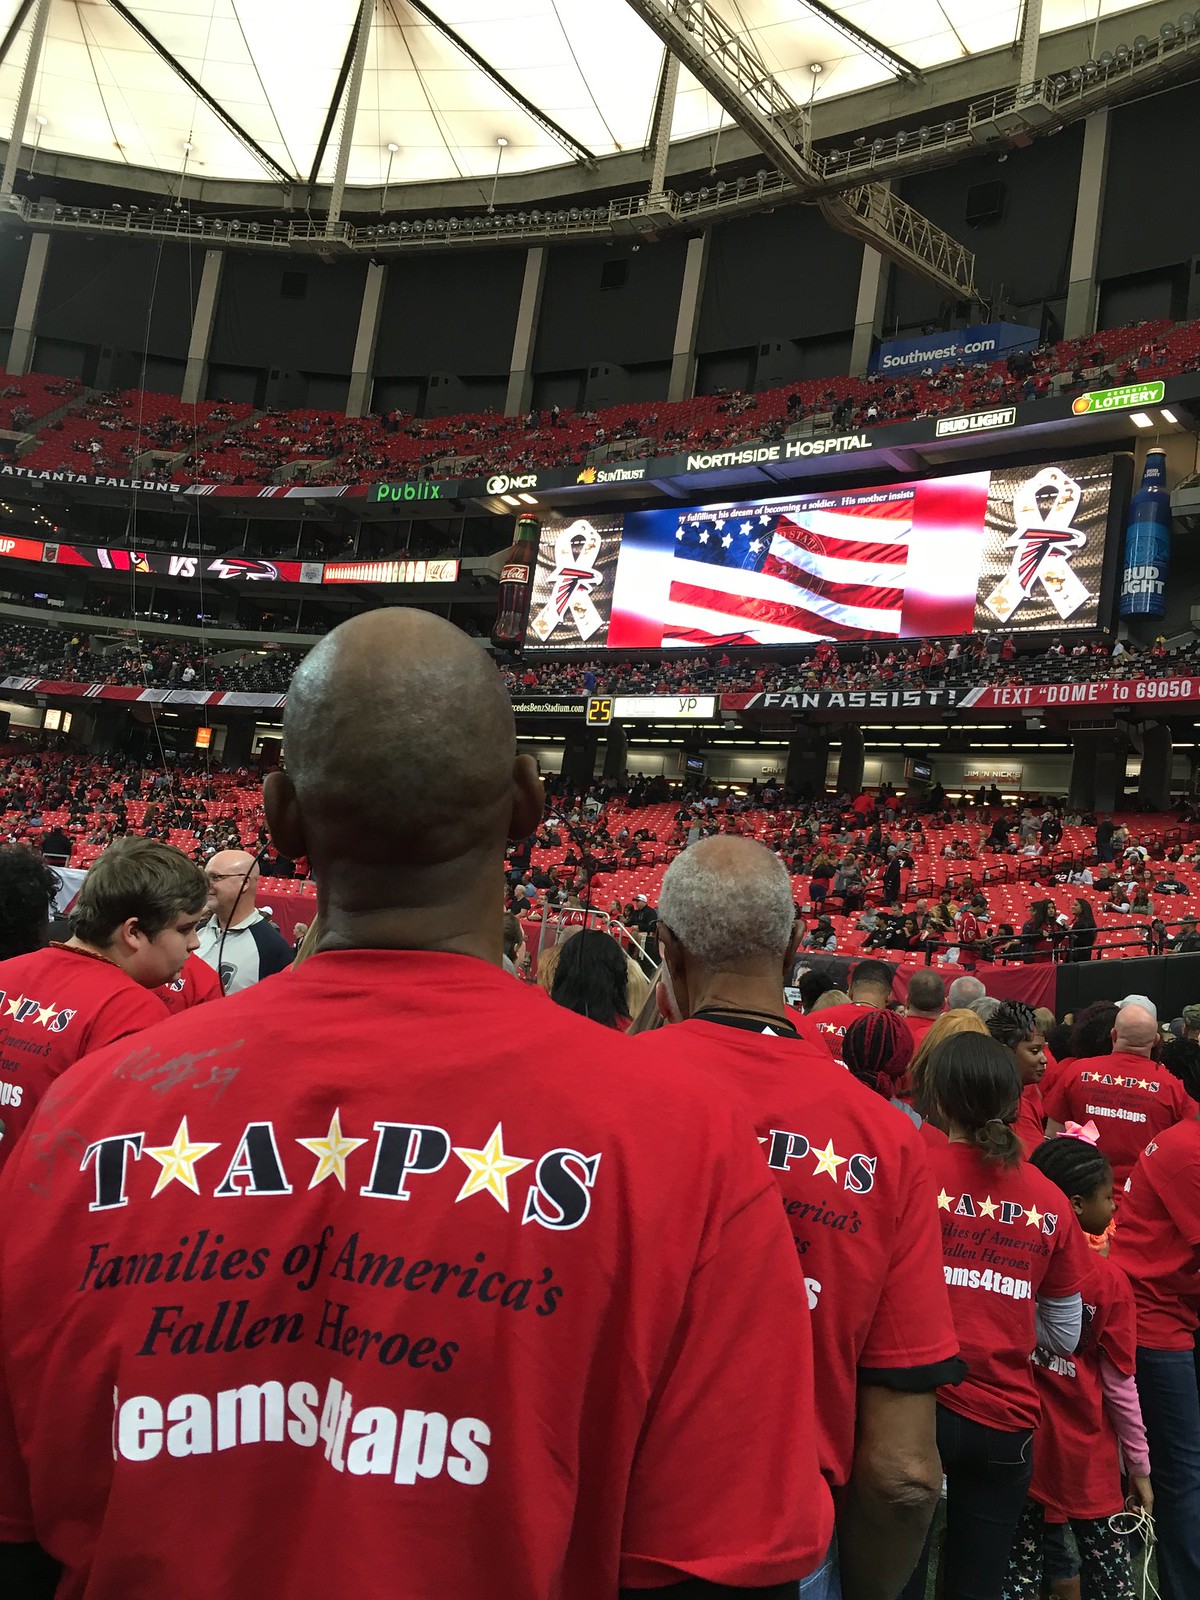 2016_T4T_ATL Falcons Game Day 26